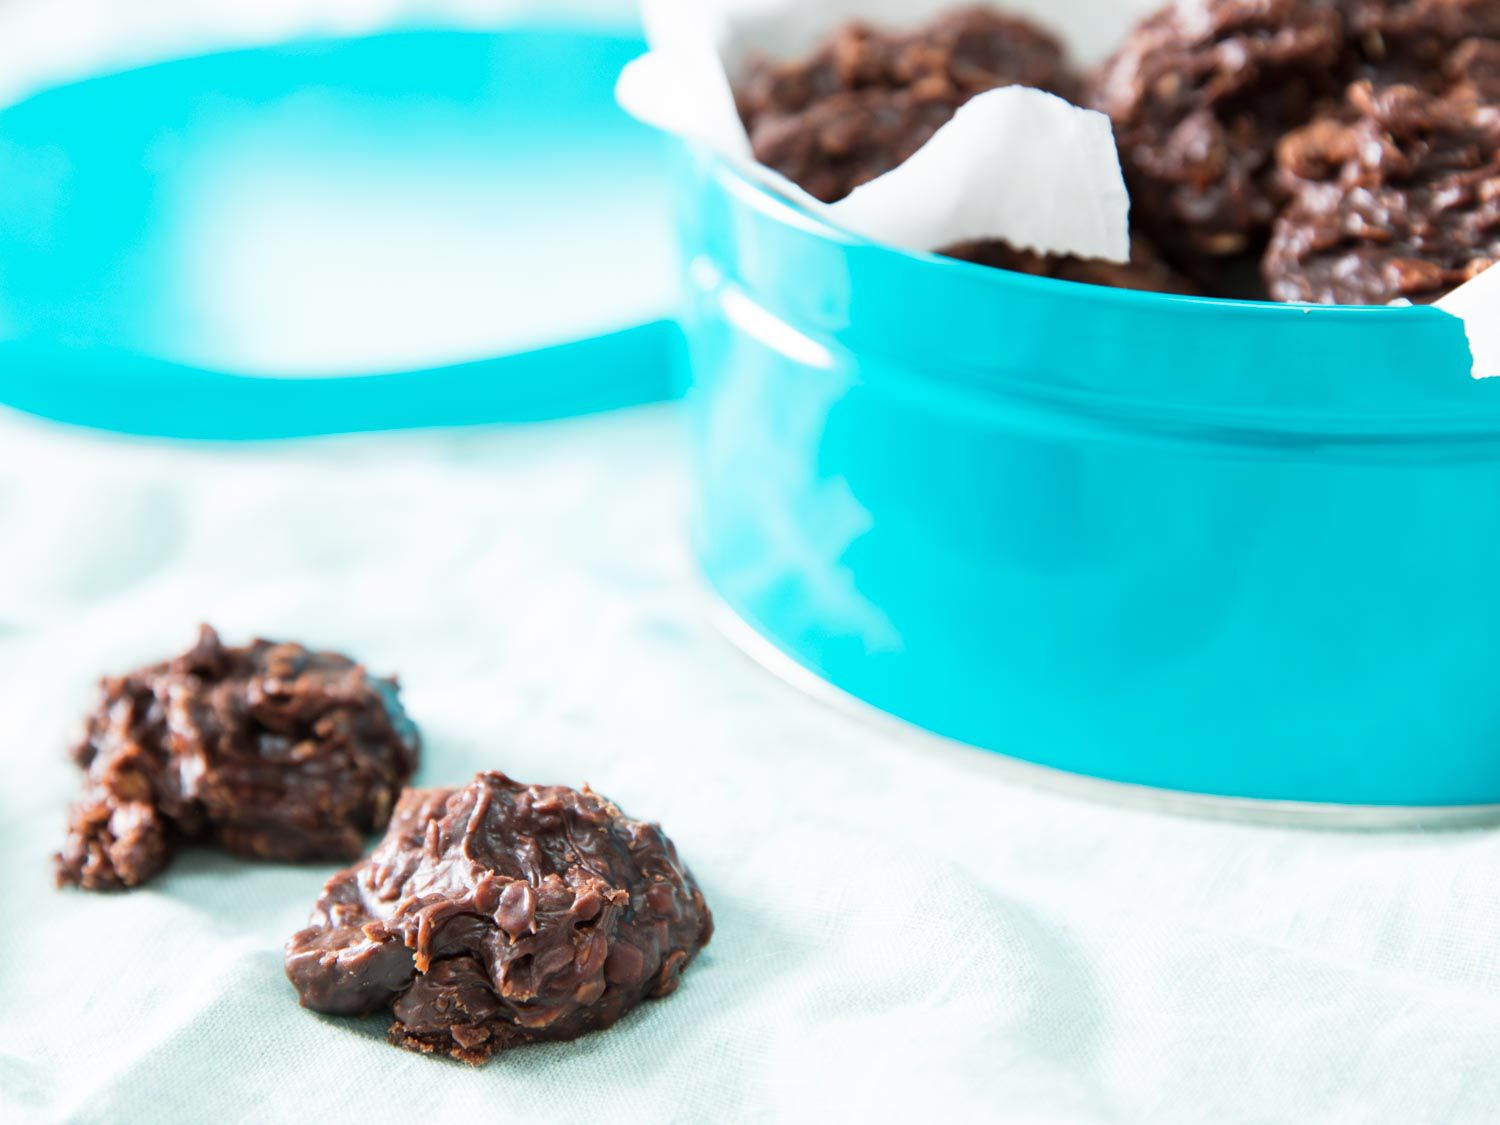 Chewy no-bake cookies next to a turquoise cookie tin.